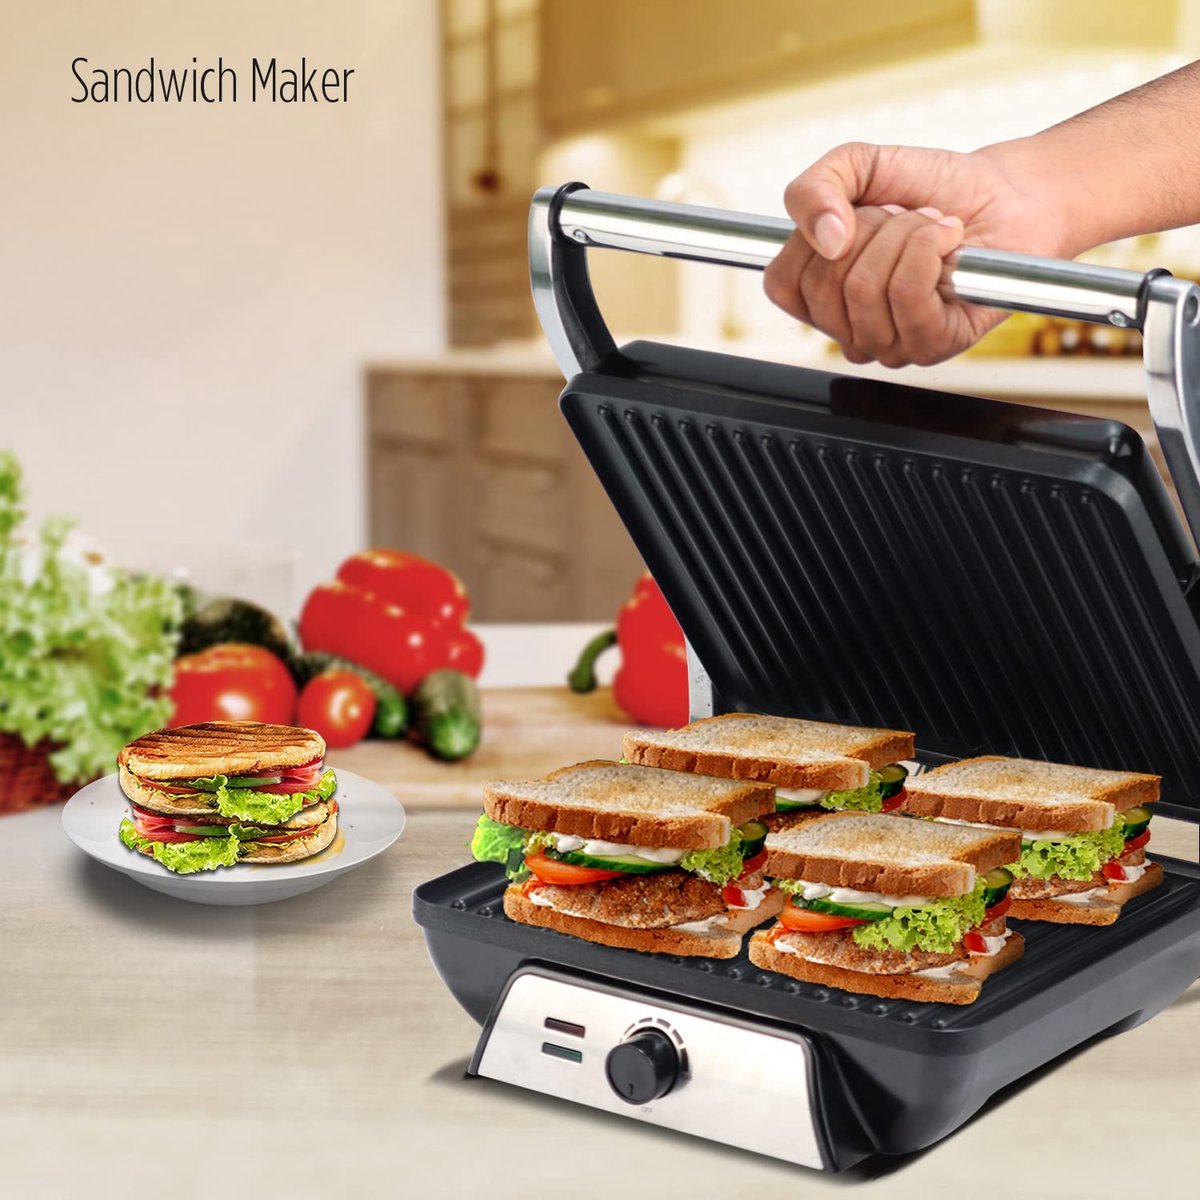 Panini Grill - Floating Top Plate - Non-stick Coating - 2000W - Adjustable Temperature - 30 x 24cm - Stainless Steel - Black - Royalty Line